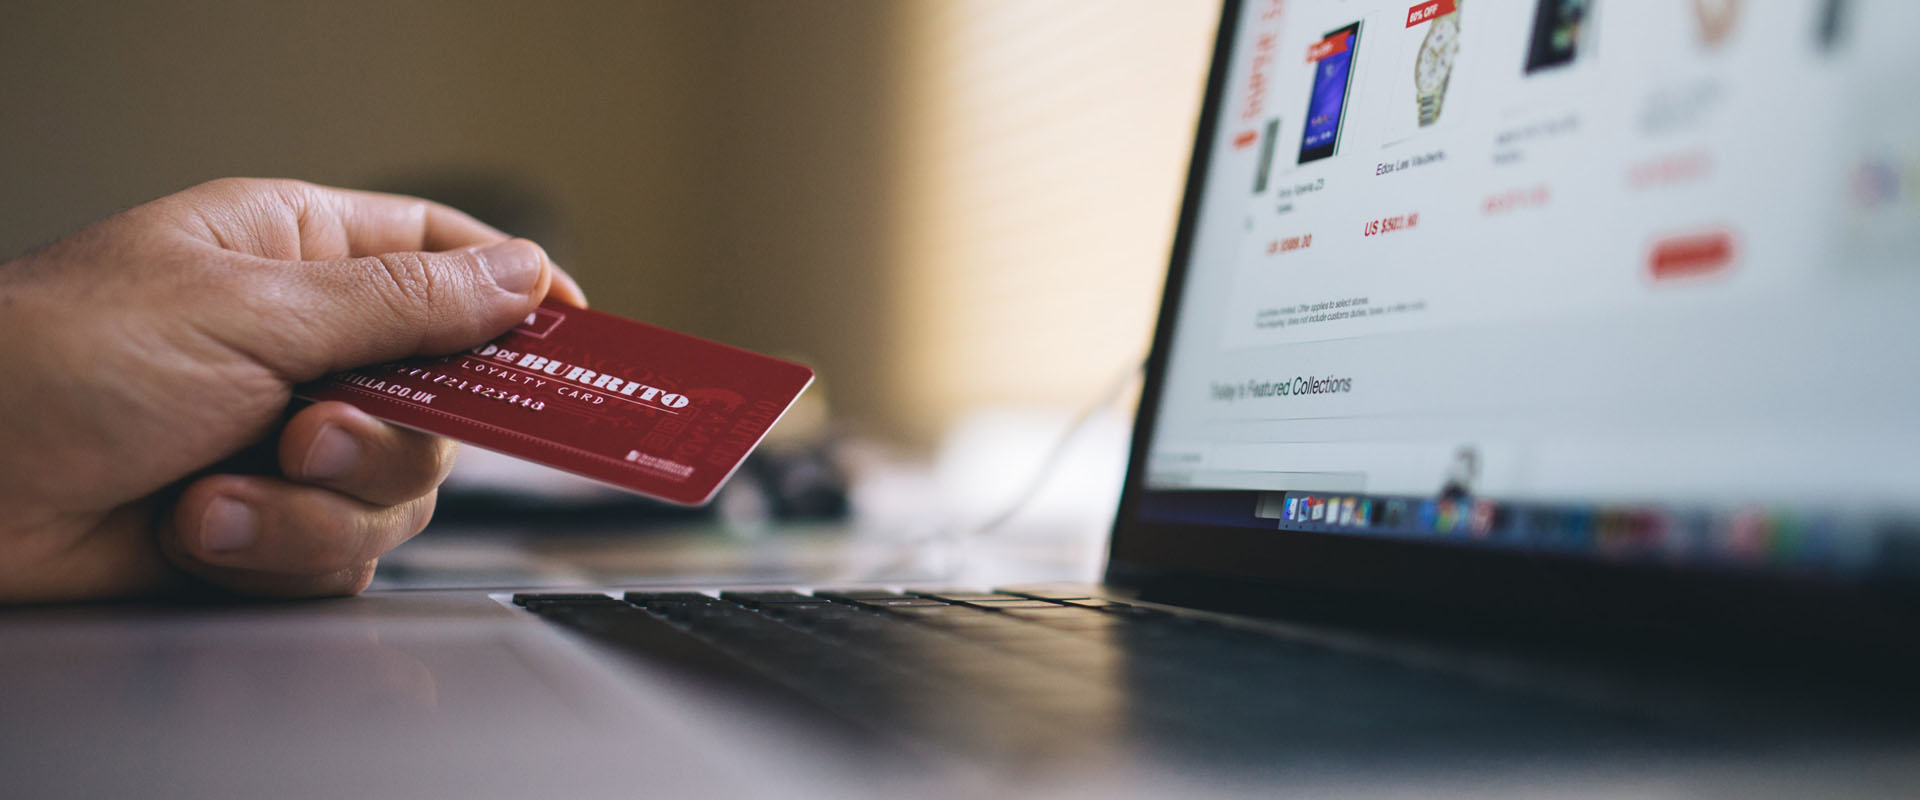 Hand holding a credit card whilst using ecommerce platform